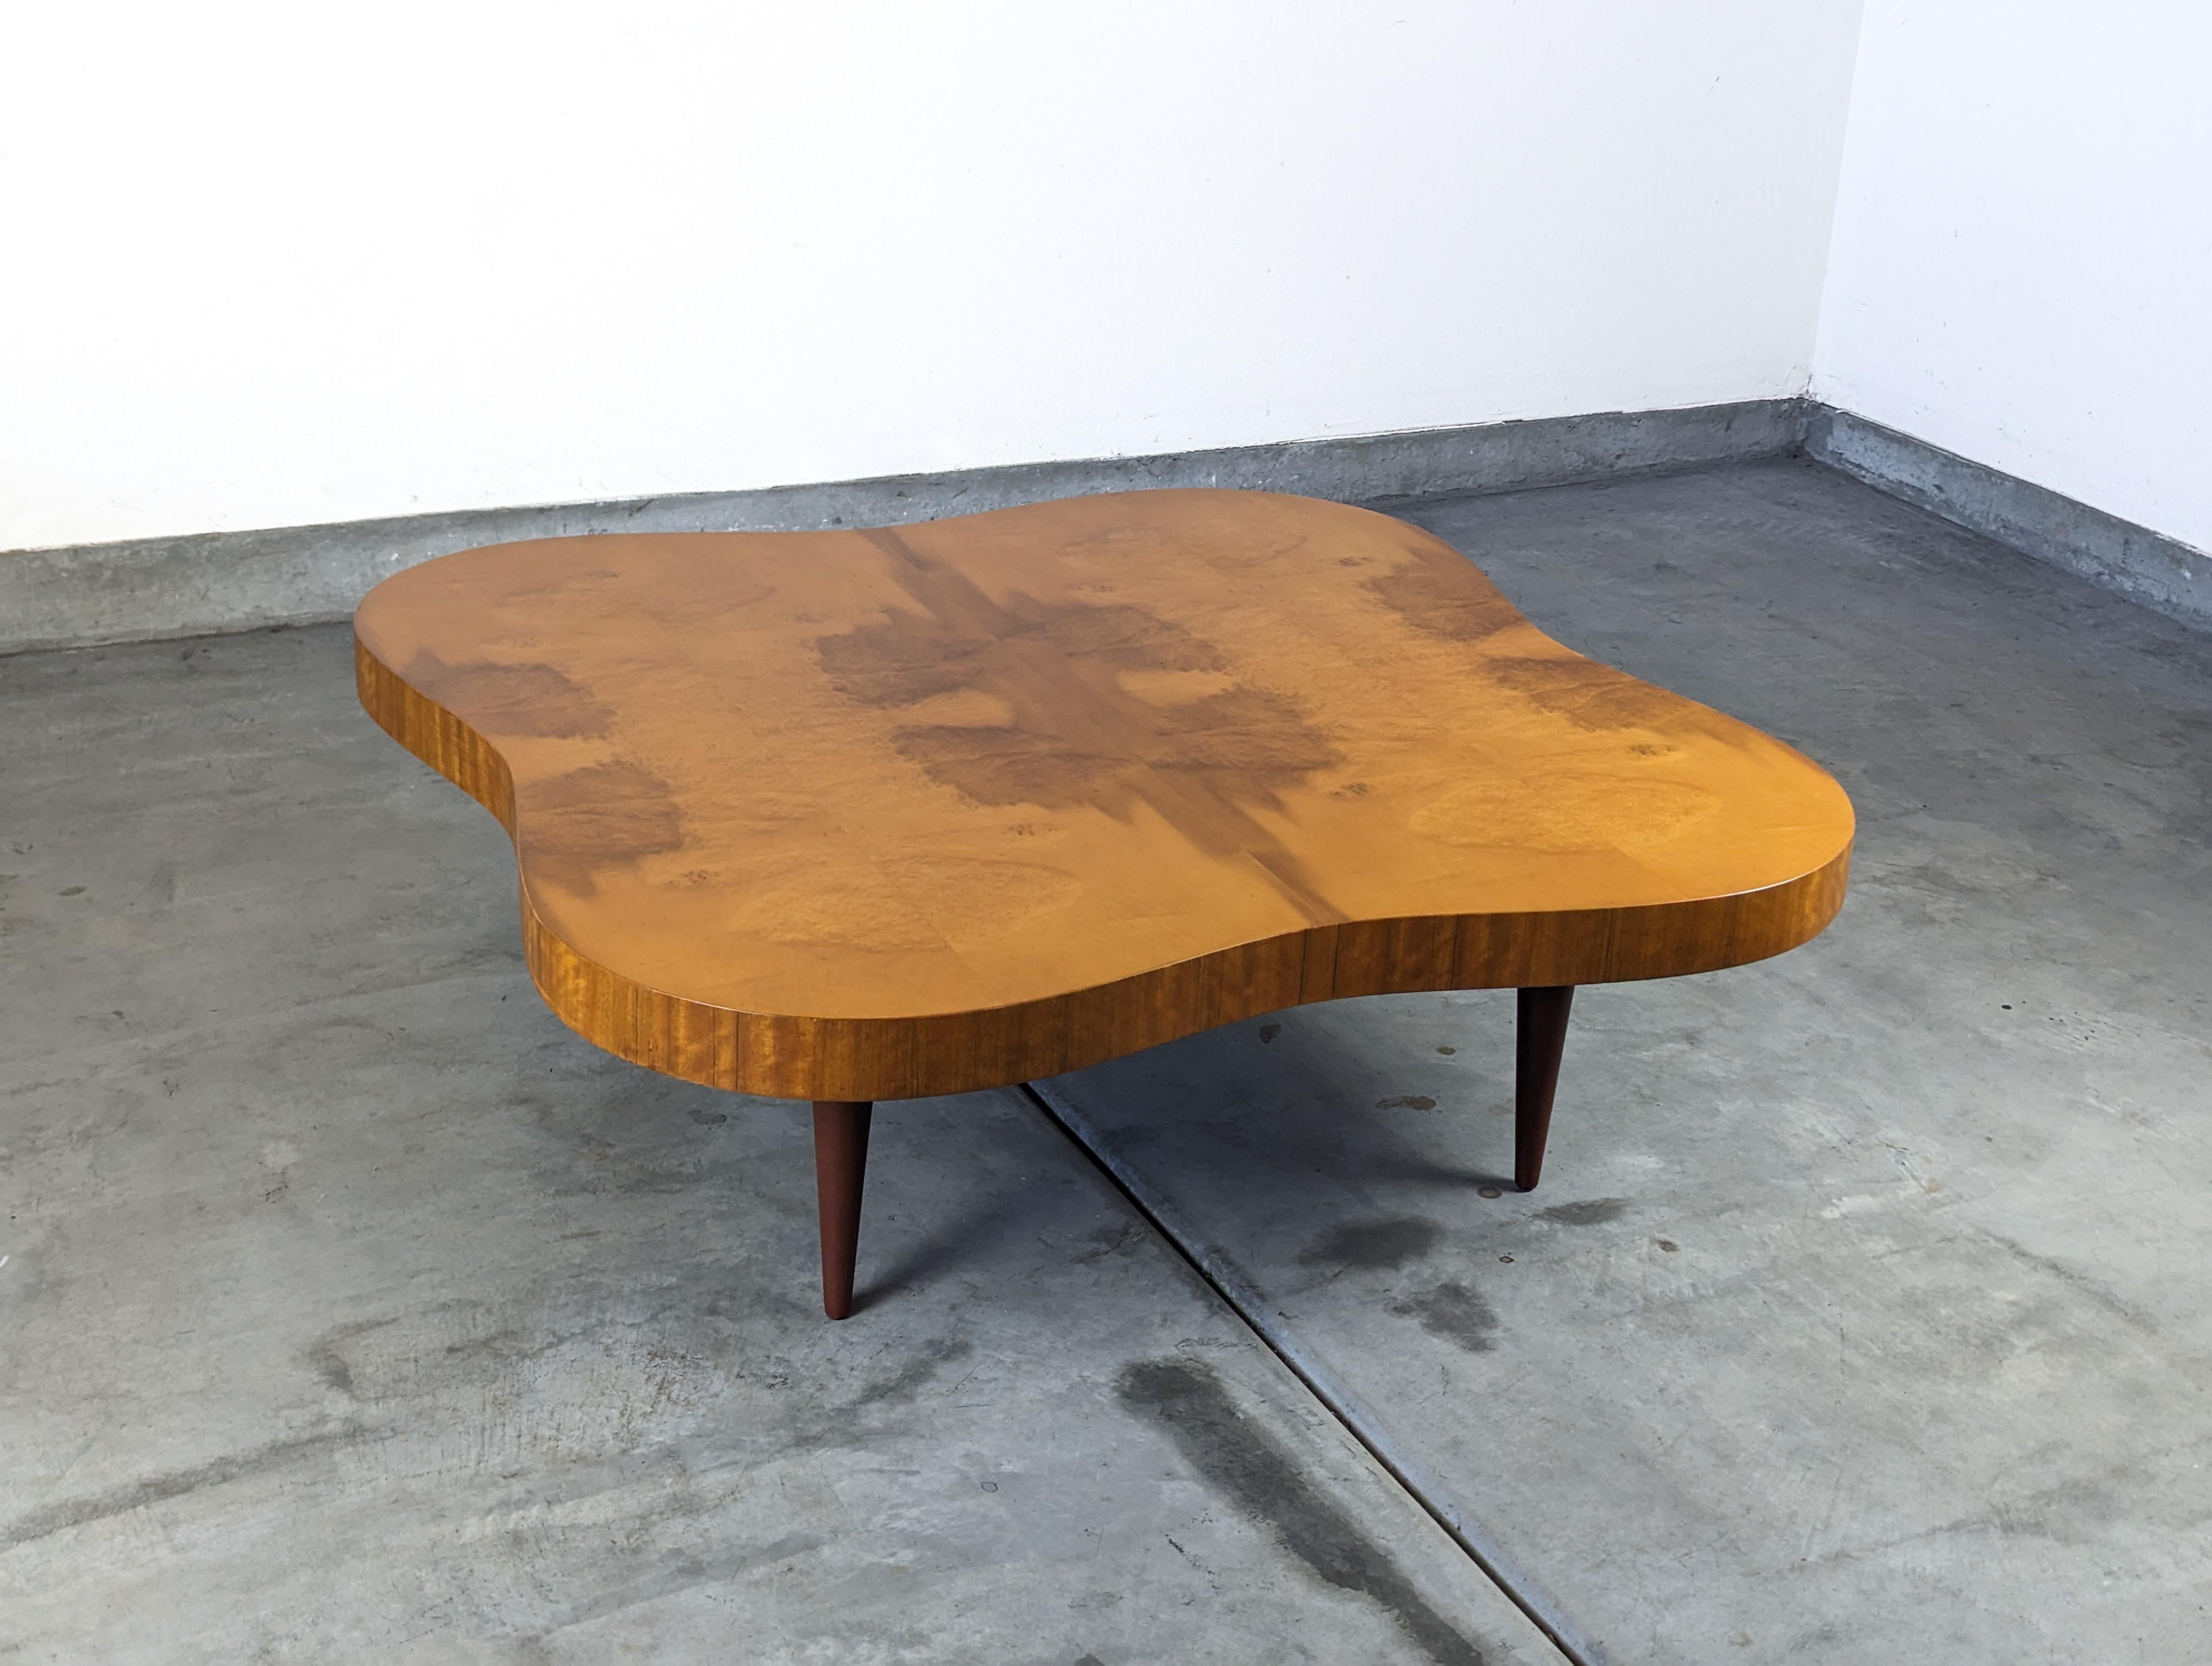 Experience the timeless charm and sophistication of mid-century modern design with this authentic Paldao coffee table, masterfully designed by the renowned Gilbert Rohde for Herman Miller in the 1940s. This is an exceptional opportunity to own a